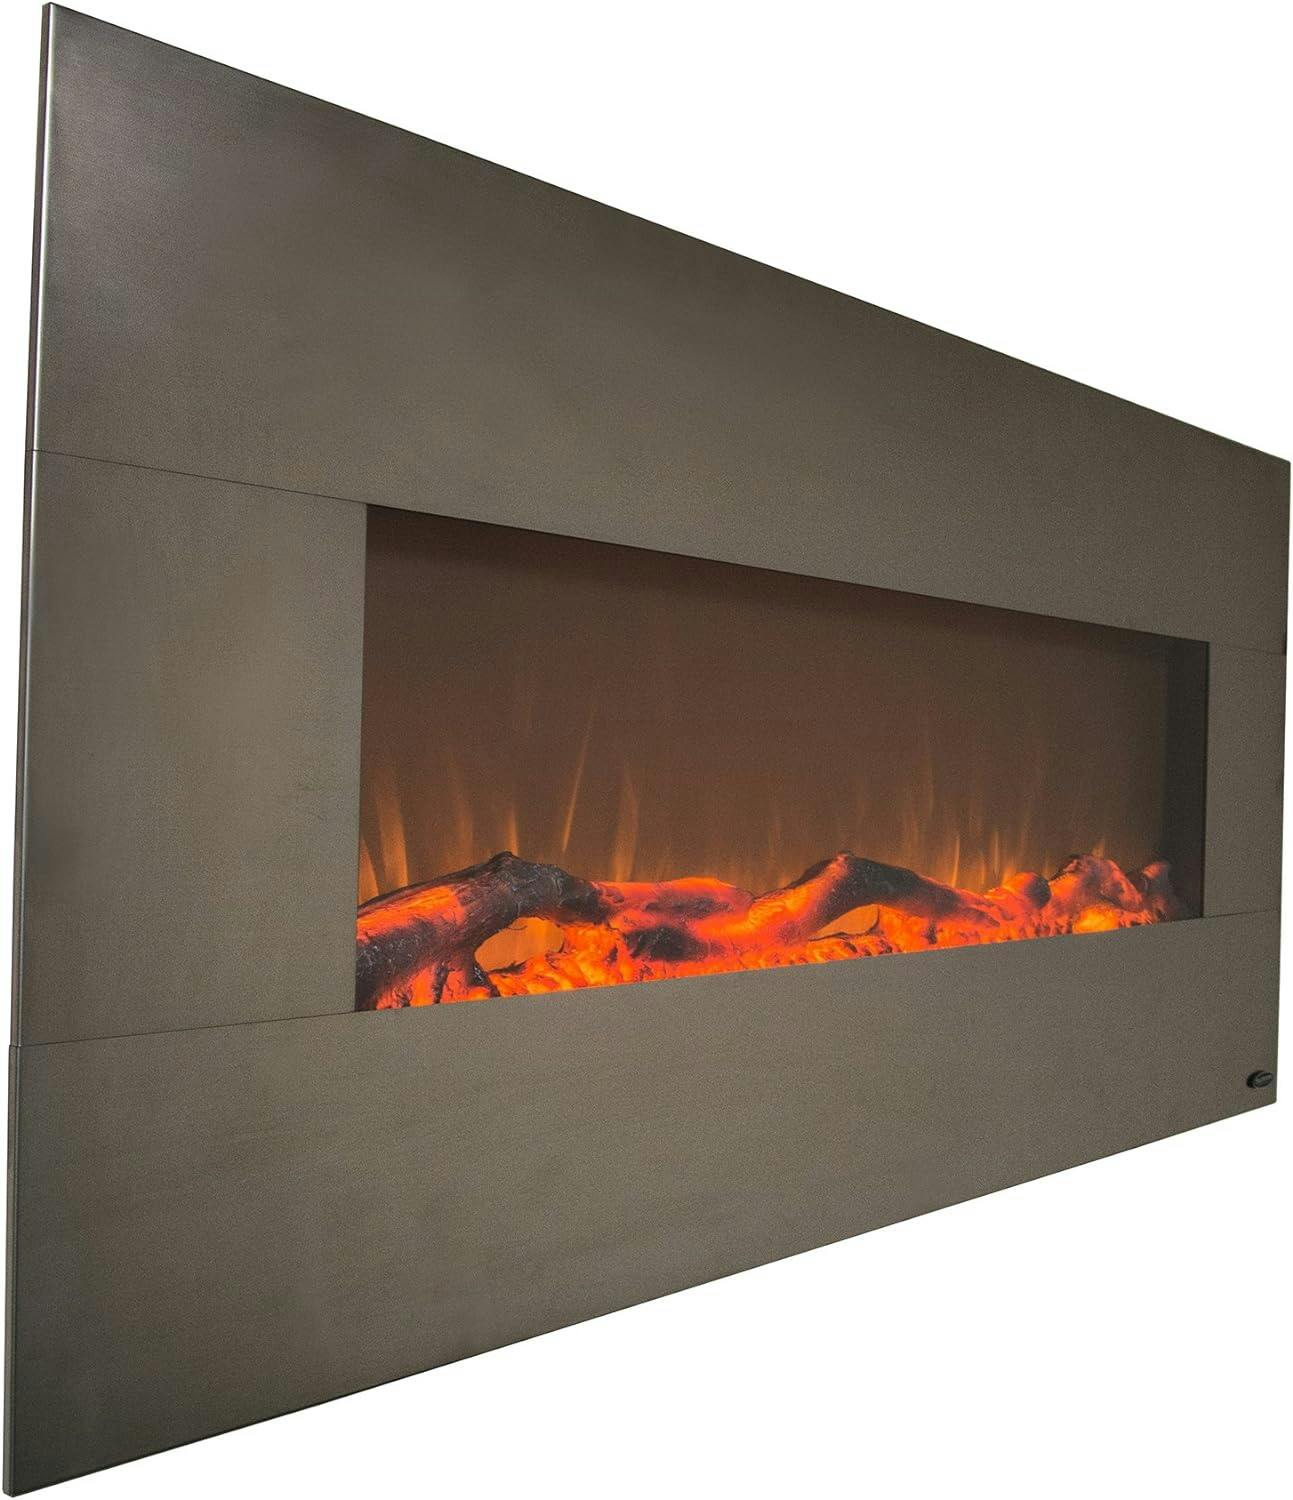 Onyx Stainless 50" Wall Mounted Electric Fireplace with Dual Heat Settings